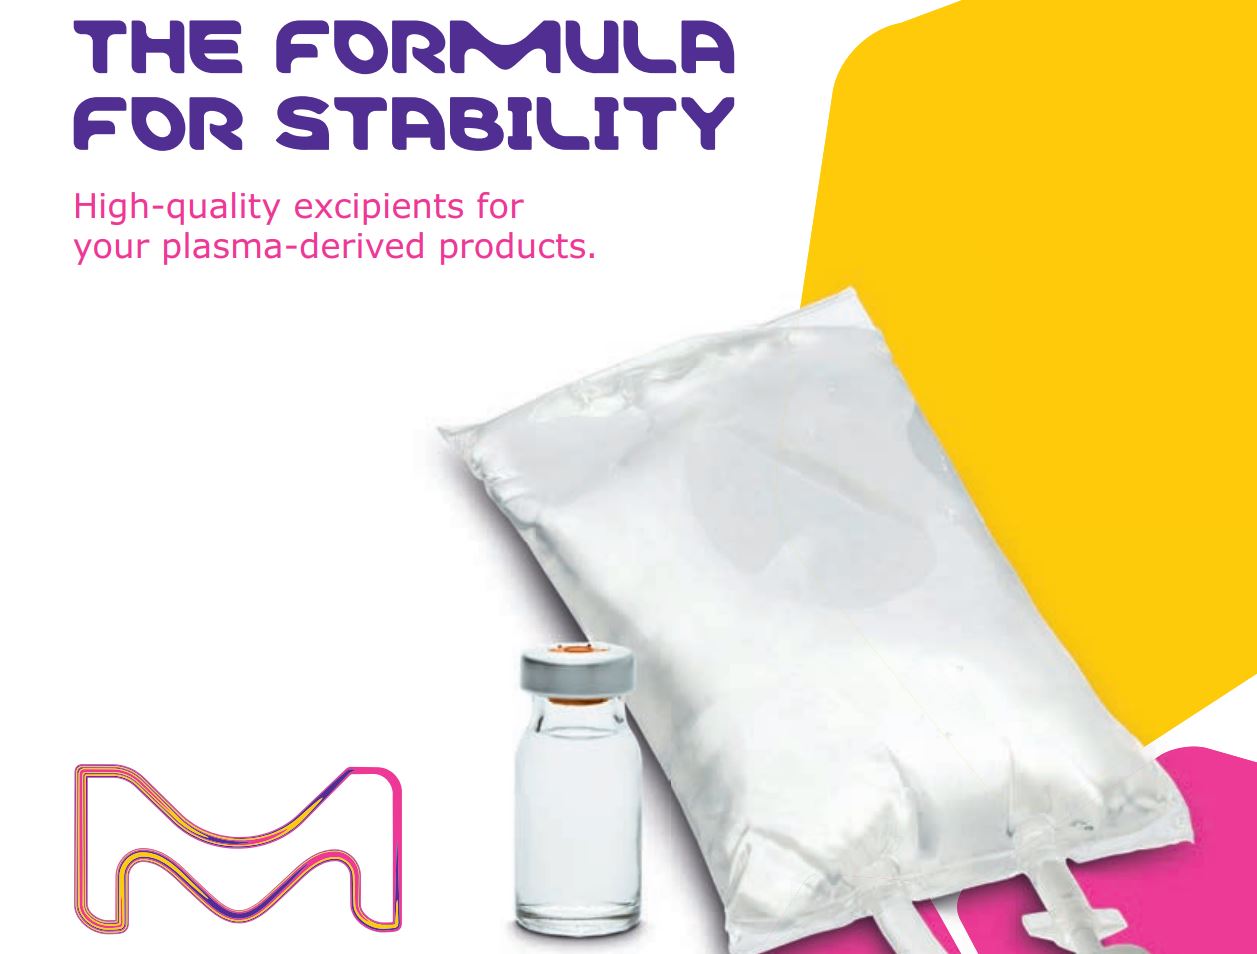 The Formula For Stability - High-quality excipients for your plasma-derived products by Merck_Merck